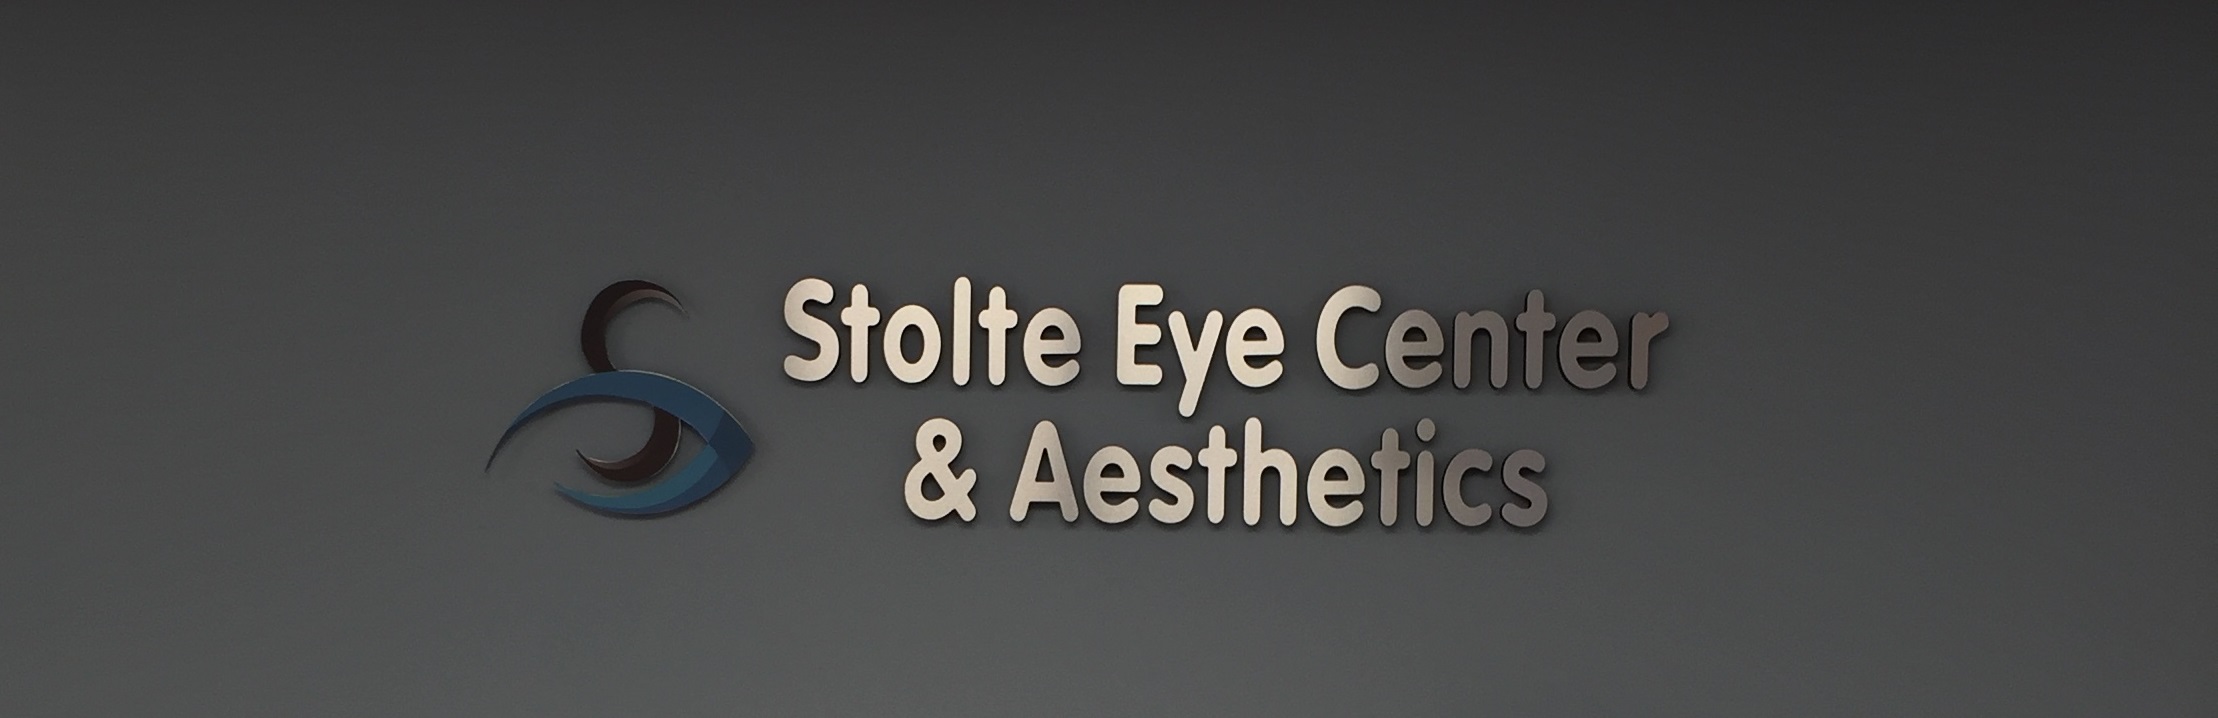 Stolte Eye Signs